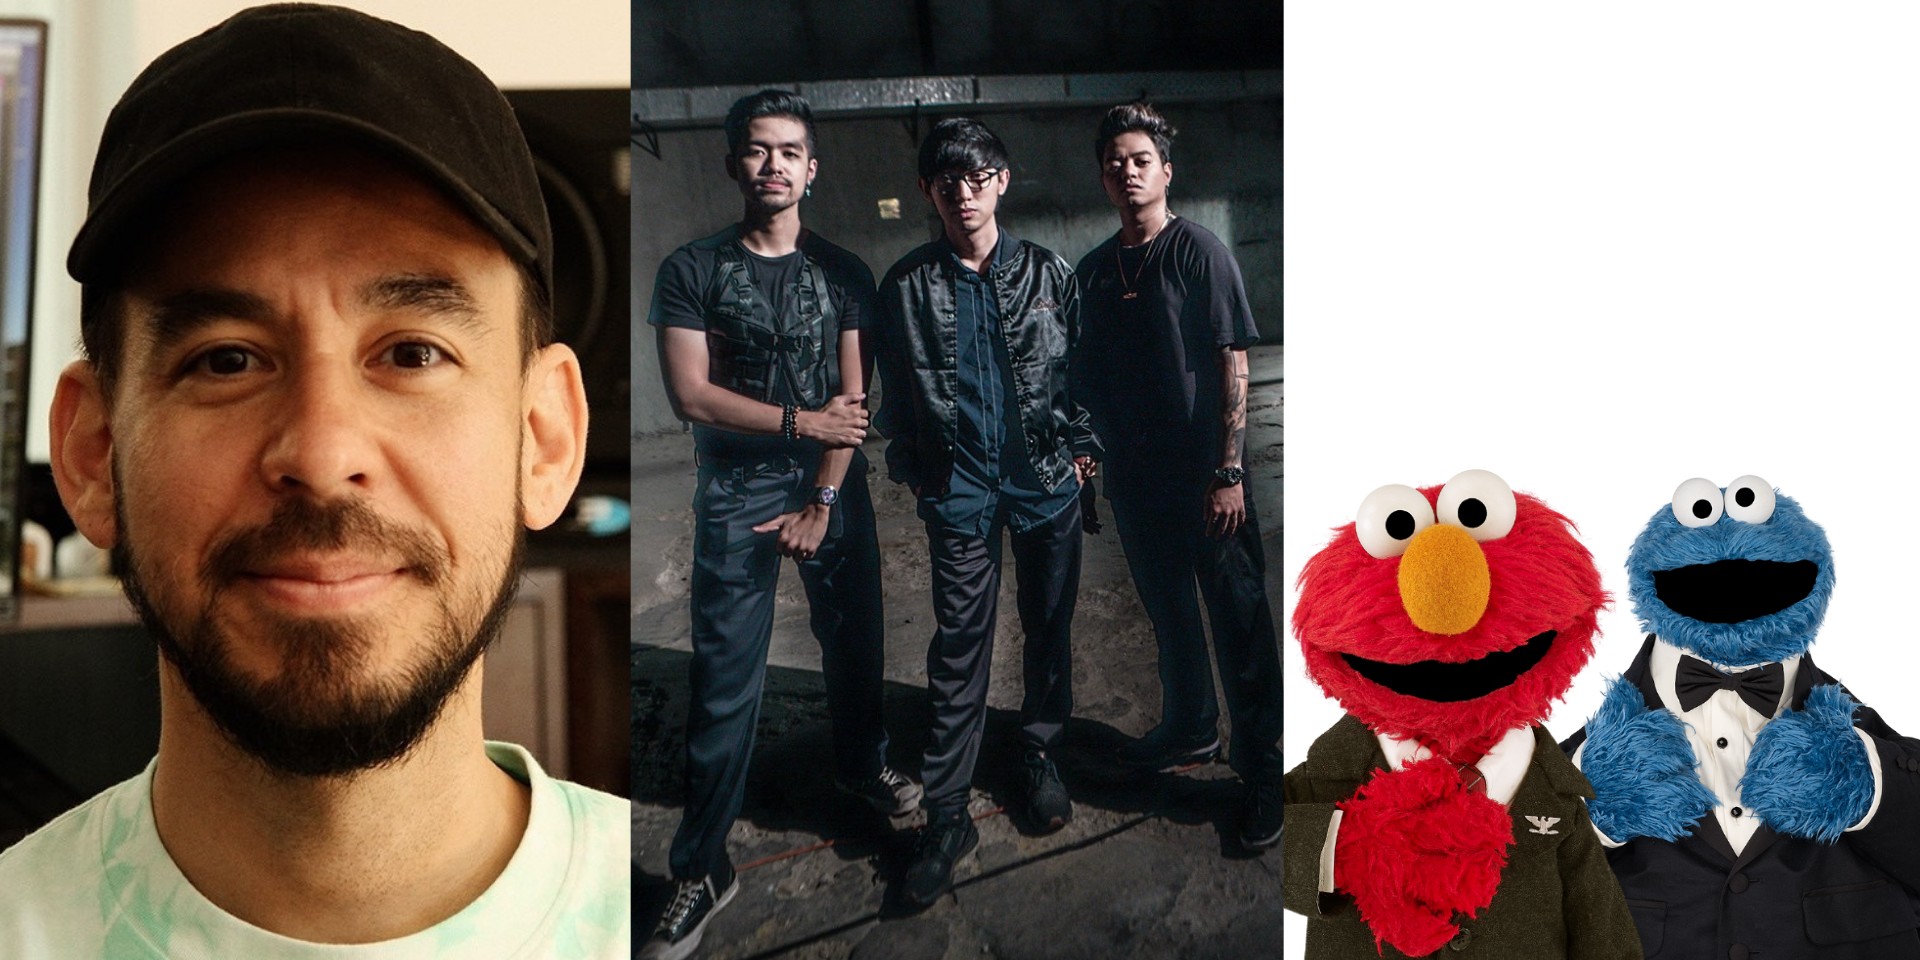 All That Matters 2020 full lineup of speakers and artists announced includes Mike Shinoda, Weird Genius, Elmo, and more 